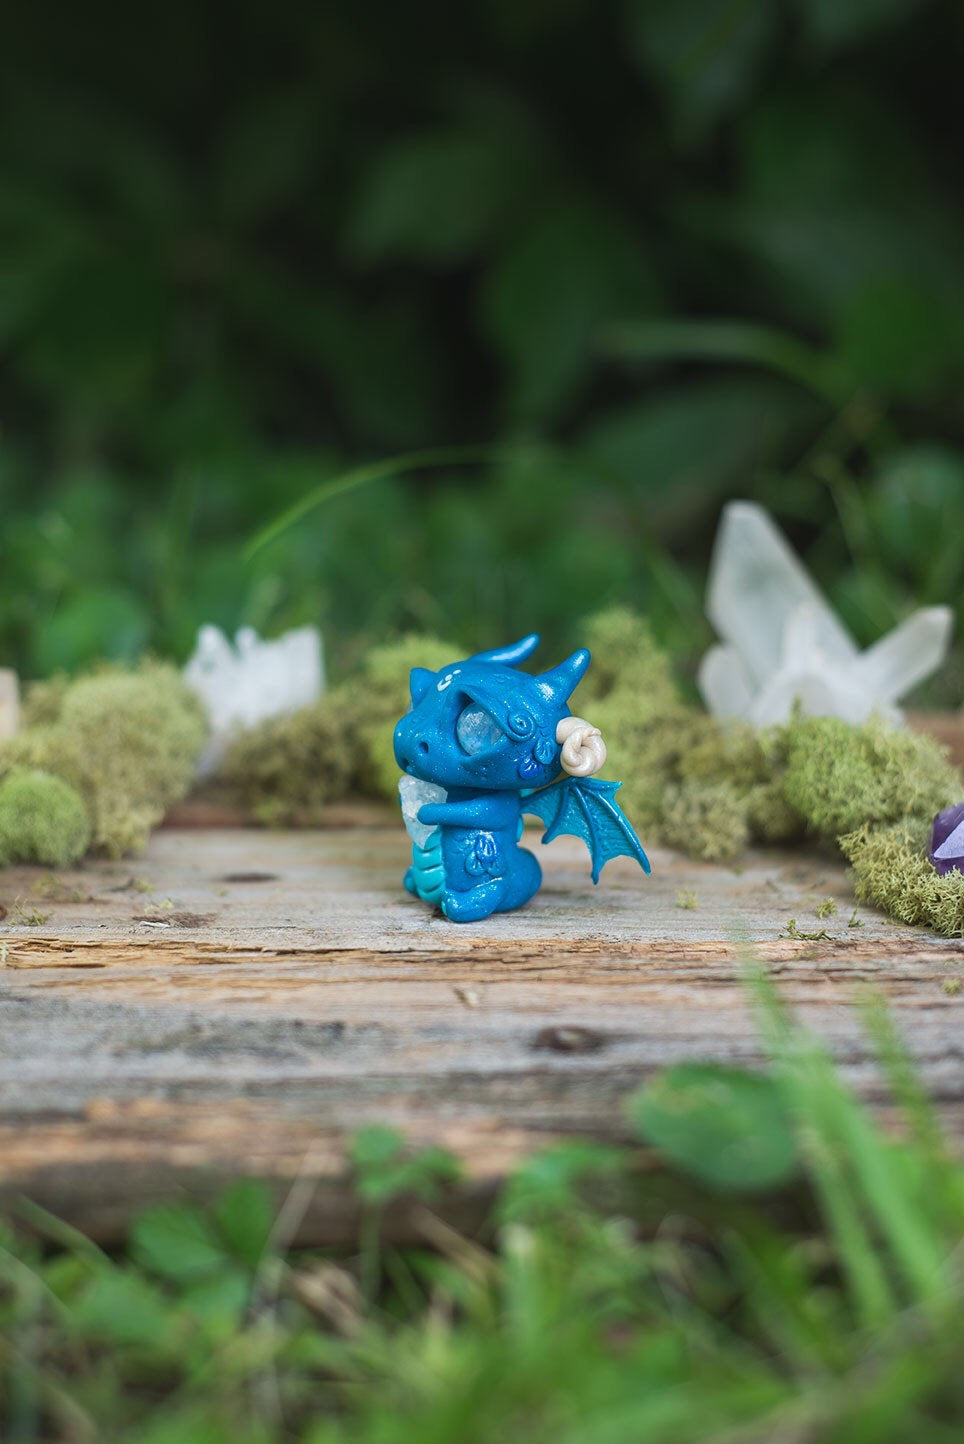 Left-Side View of Blue Dragon Mish - handmade polymer clay dragon creature with tail and wings, holding aquamarine crystal